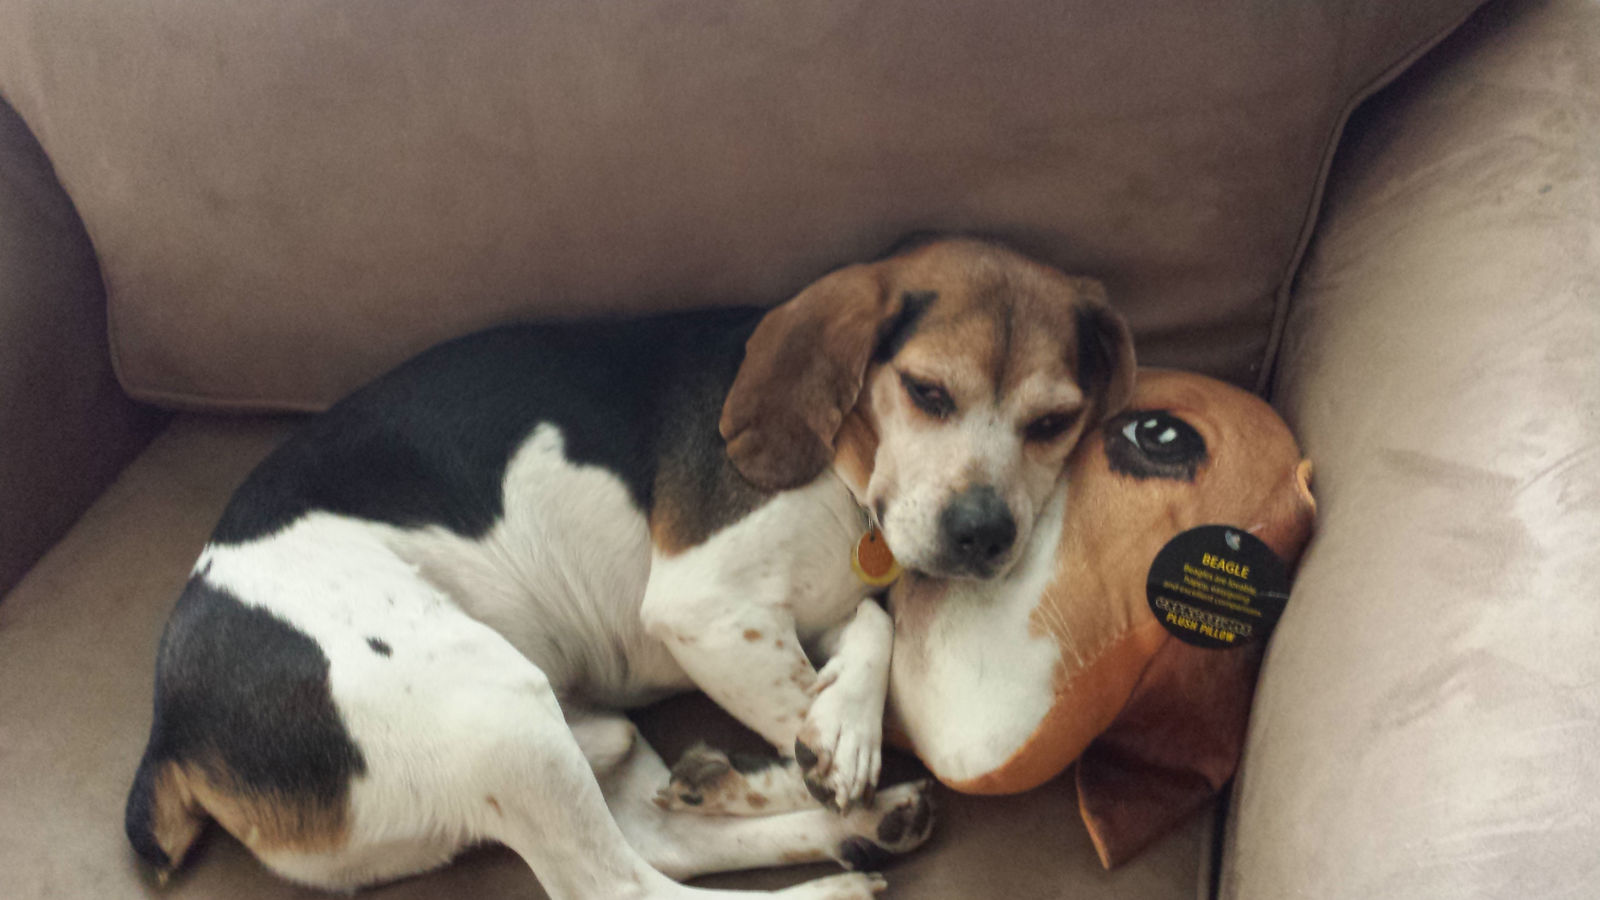 This is Ruckys, he is WTOP's Digital Editor Colleen Kelleher's dog. He'd prefer his naps on his beagle pillow not be interrupted for web content purposes. (WTOP/Colleen Kelleher)